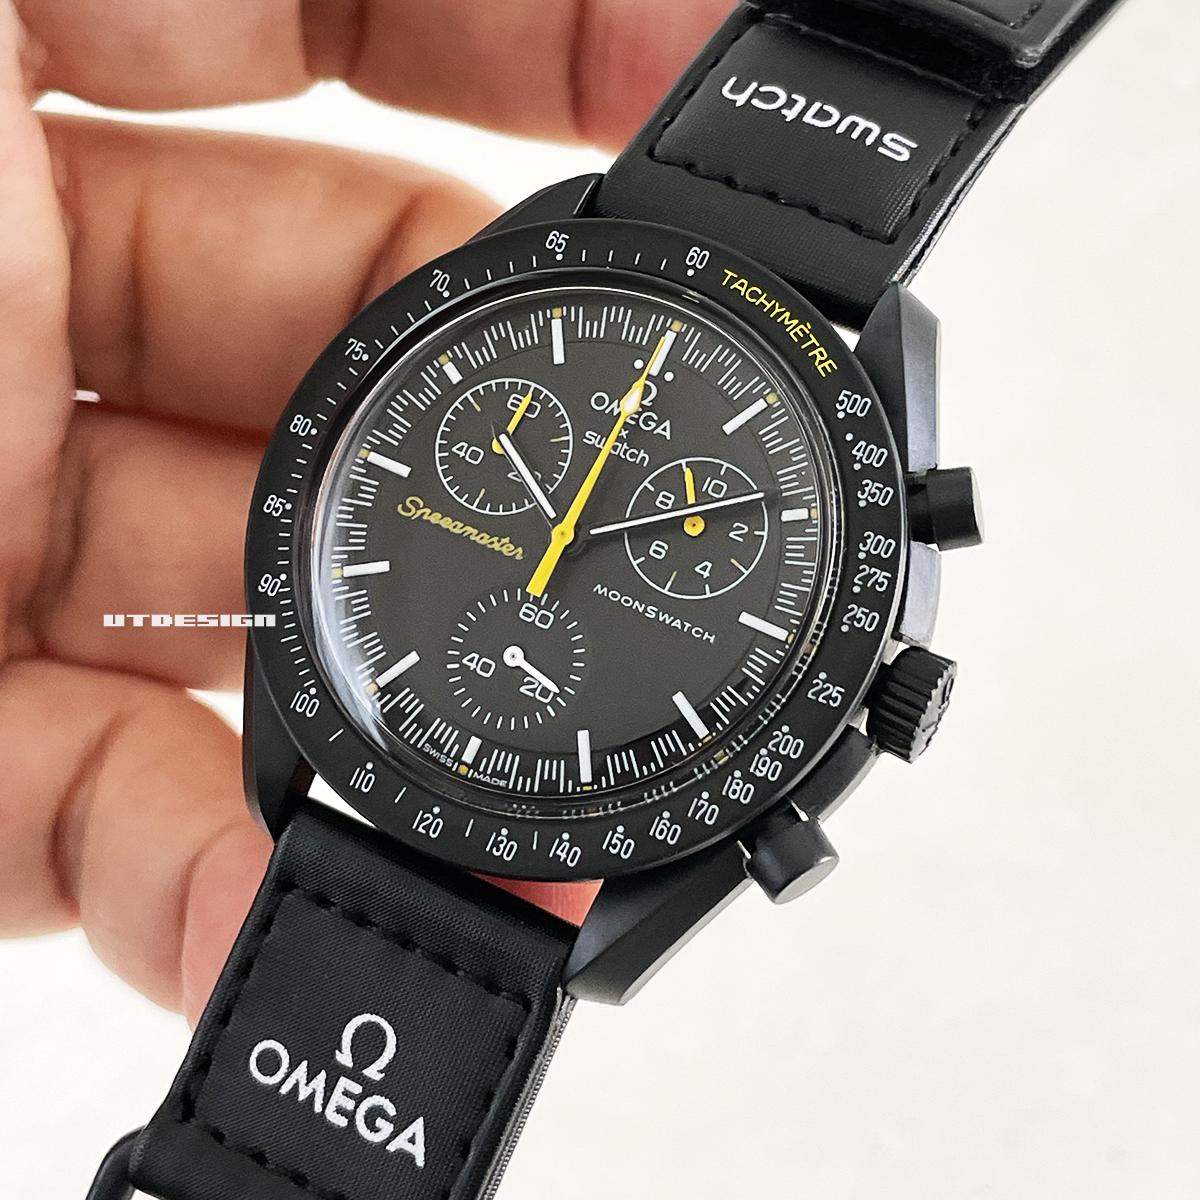 OMEGA x SWATCH / MOONSWATCH-MISSION TO DARK SIDE OF THE MOON 